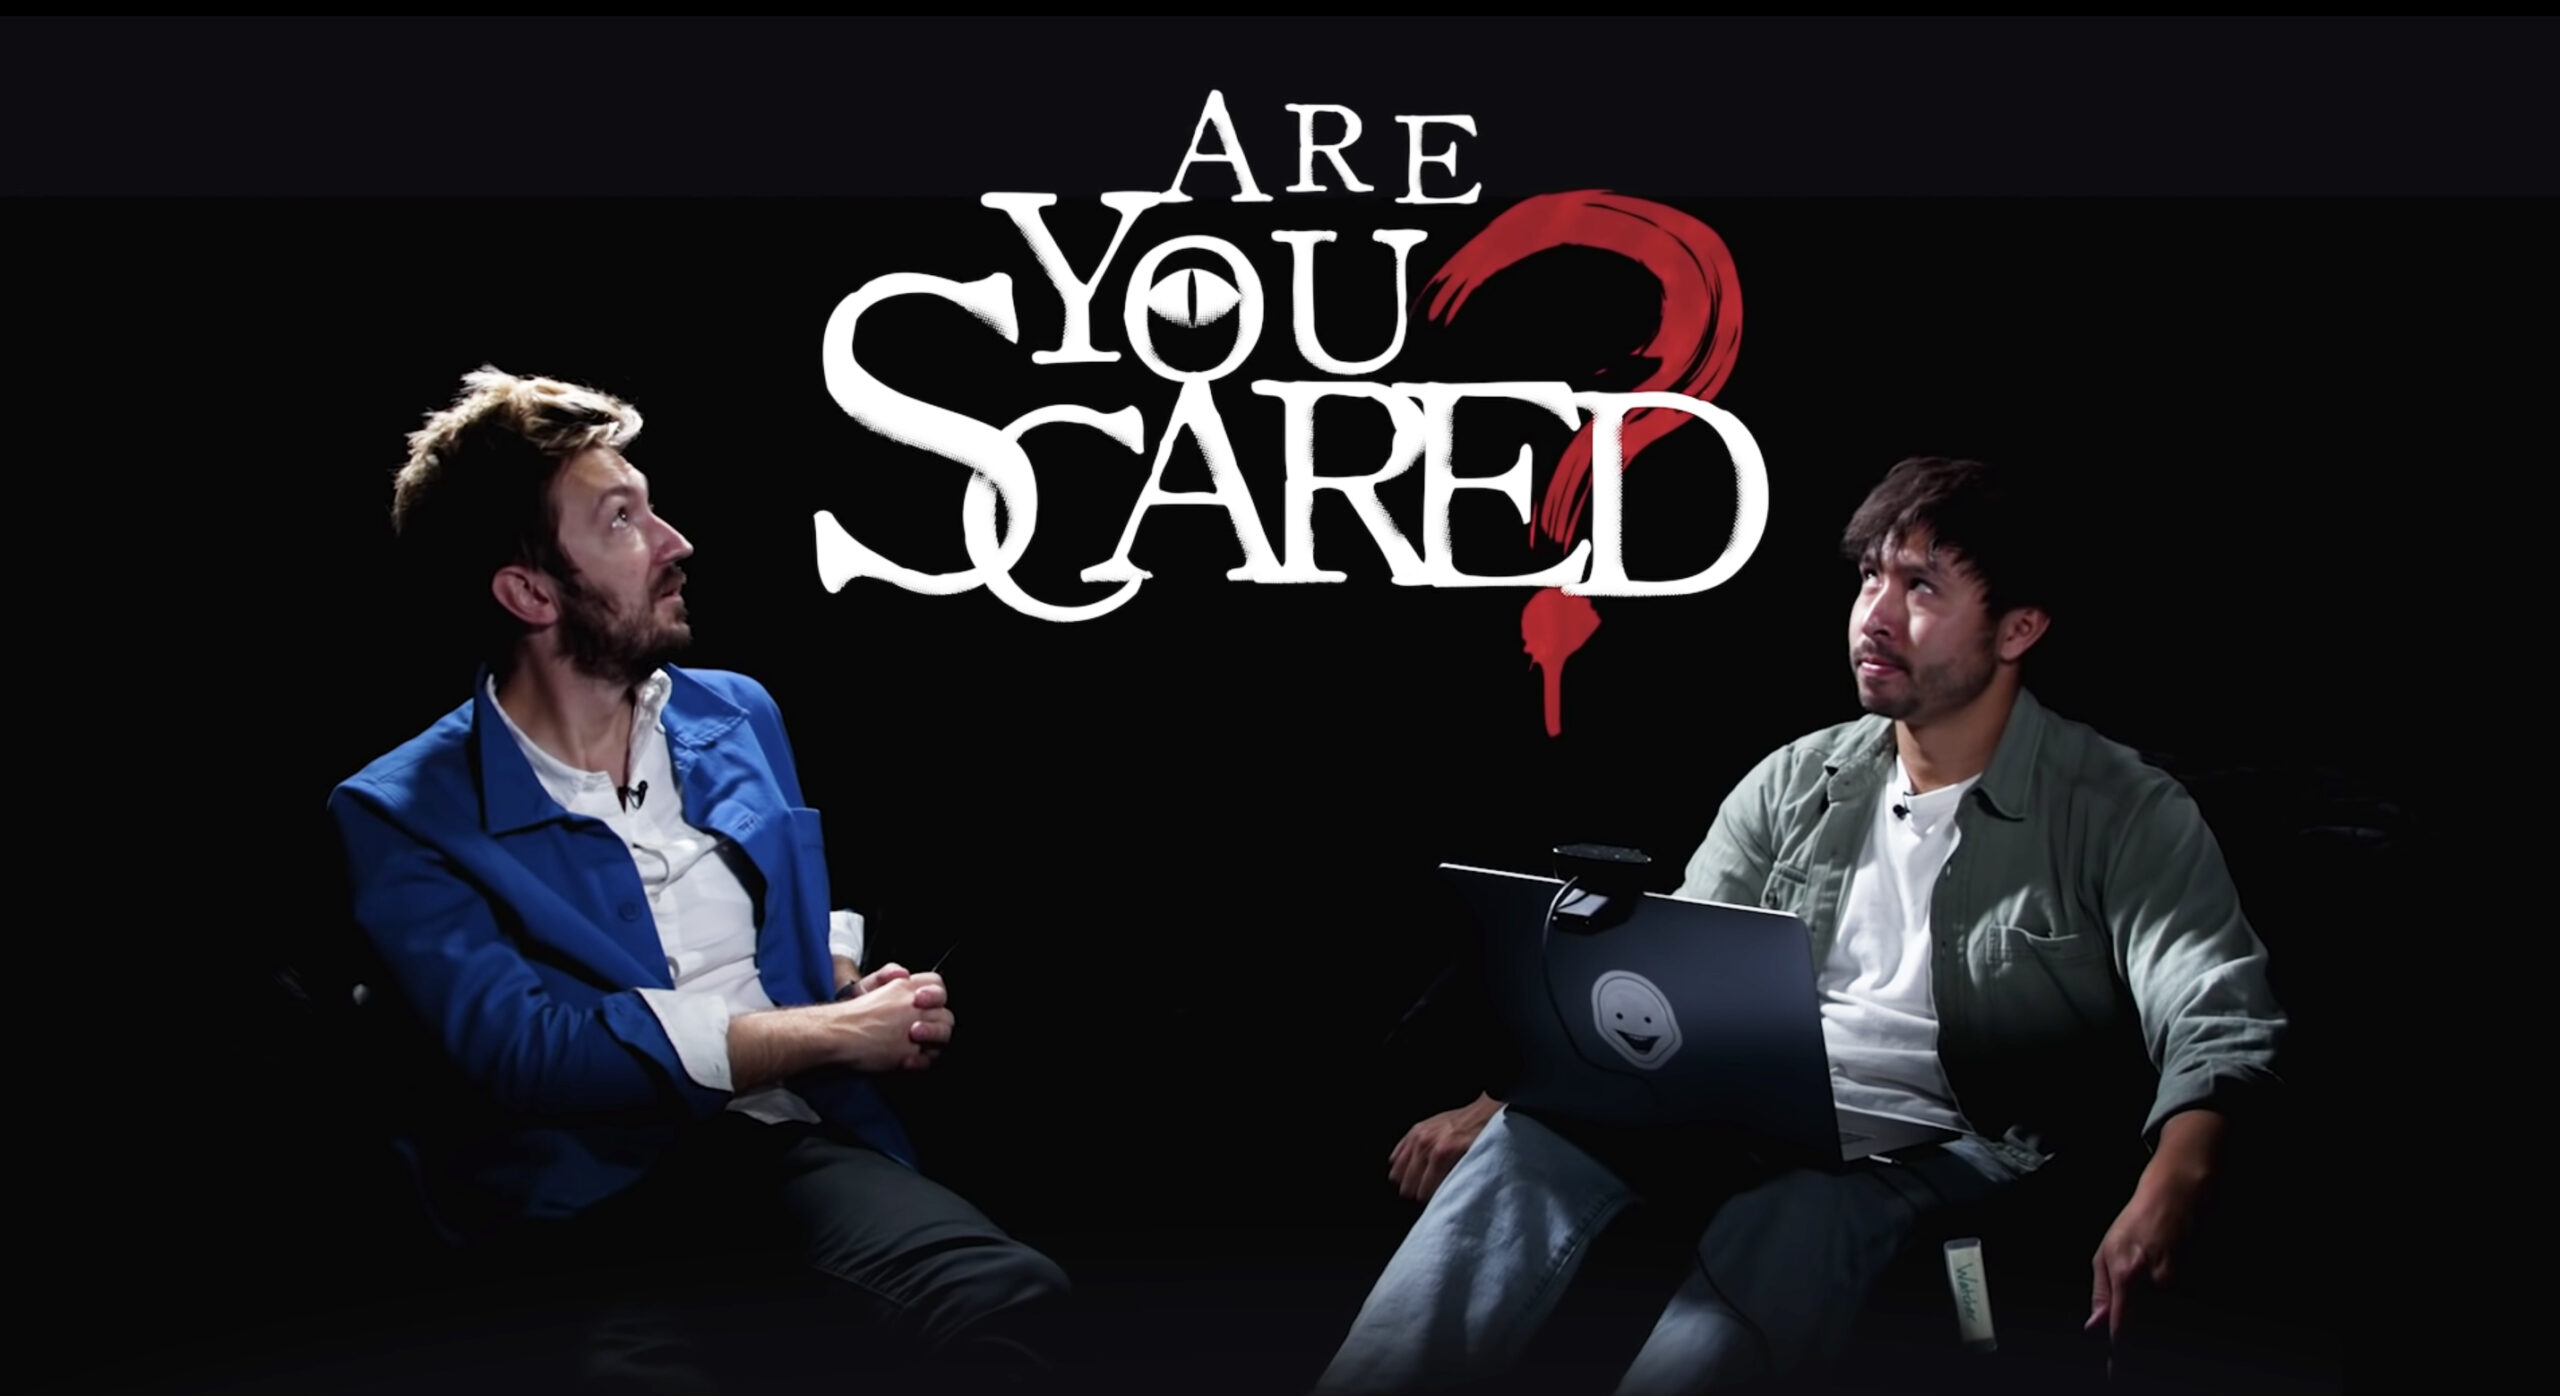 Ryan Bergara and Shane Madej staring at the "Are You Scared" sign